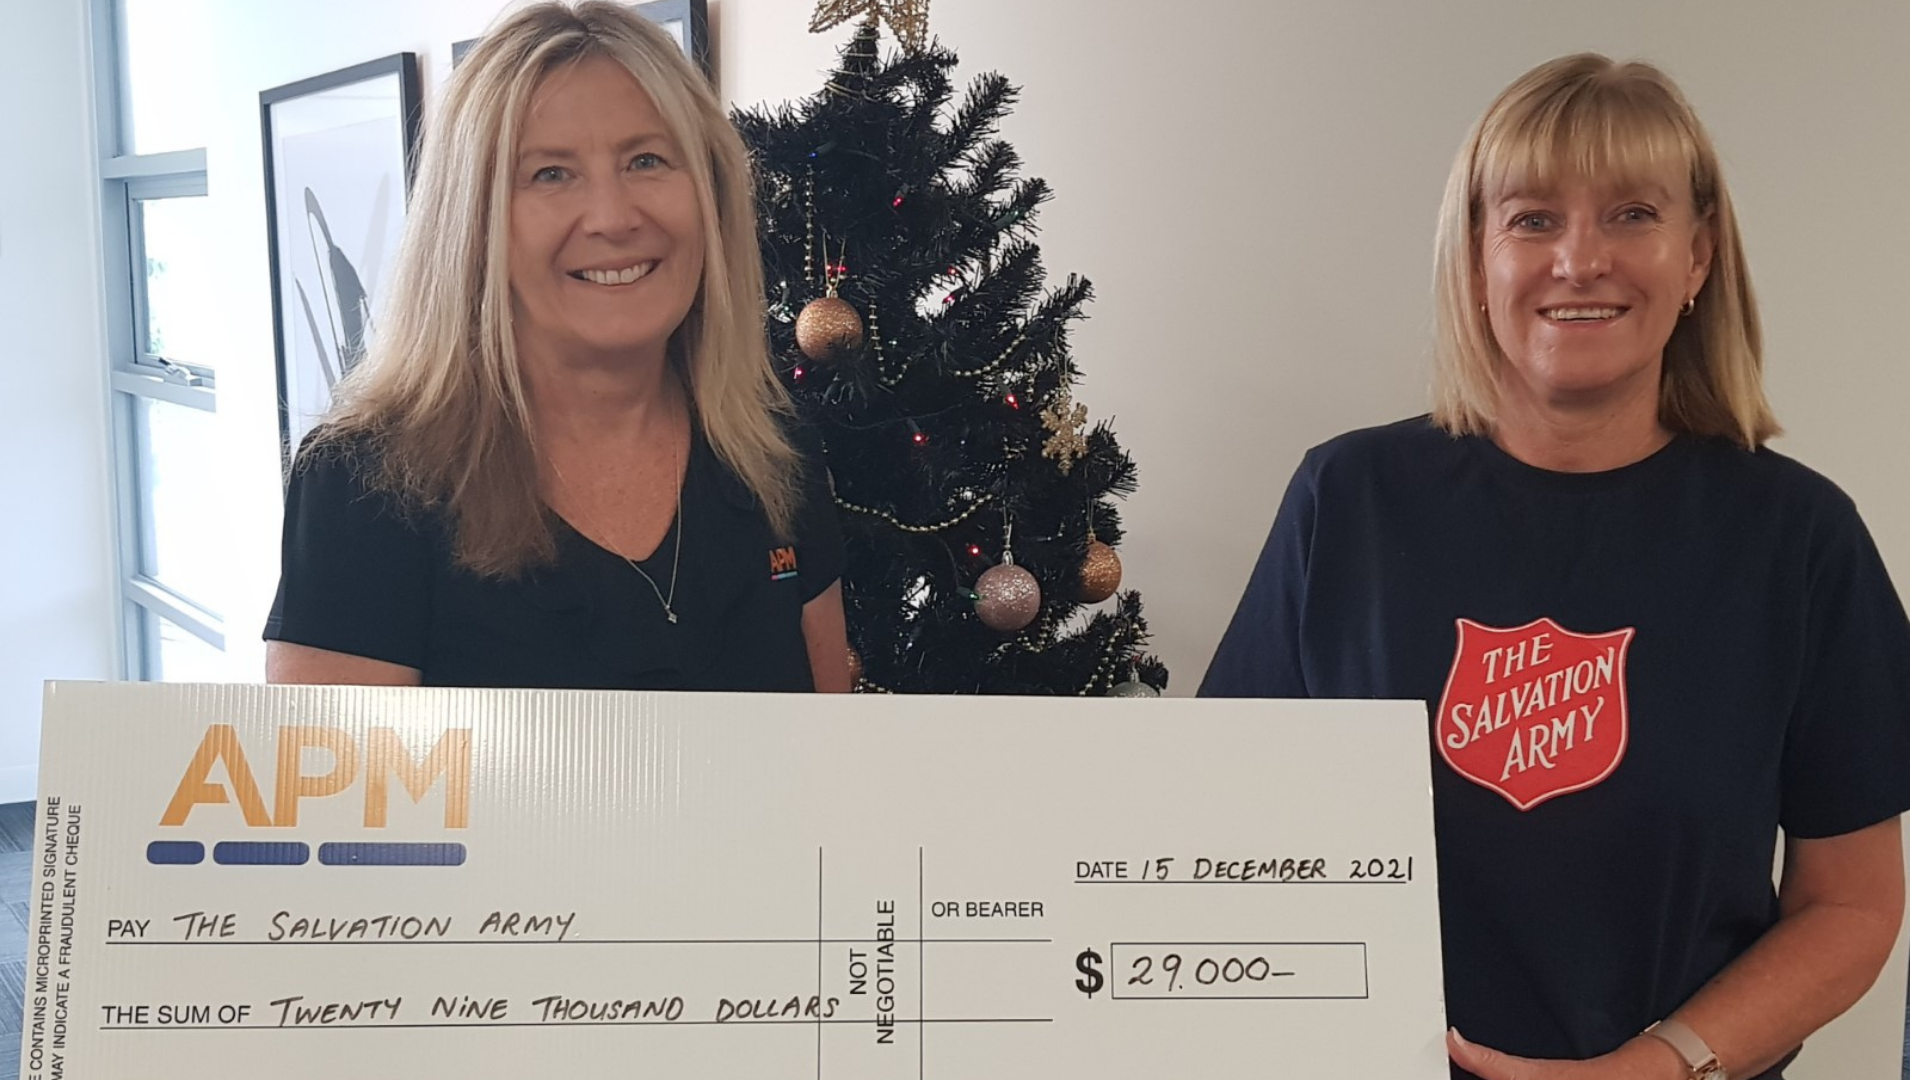 Salvation Army’s Relationship Manager Corporate Partnerships, Jayne Campbell, dropped by South Geelong office to personally thank APM and collect the donation of $29,000 from APM Employment Services People and Culture Business Partner, Michelle Edwards.